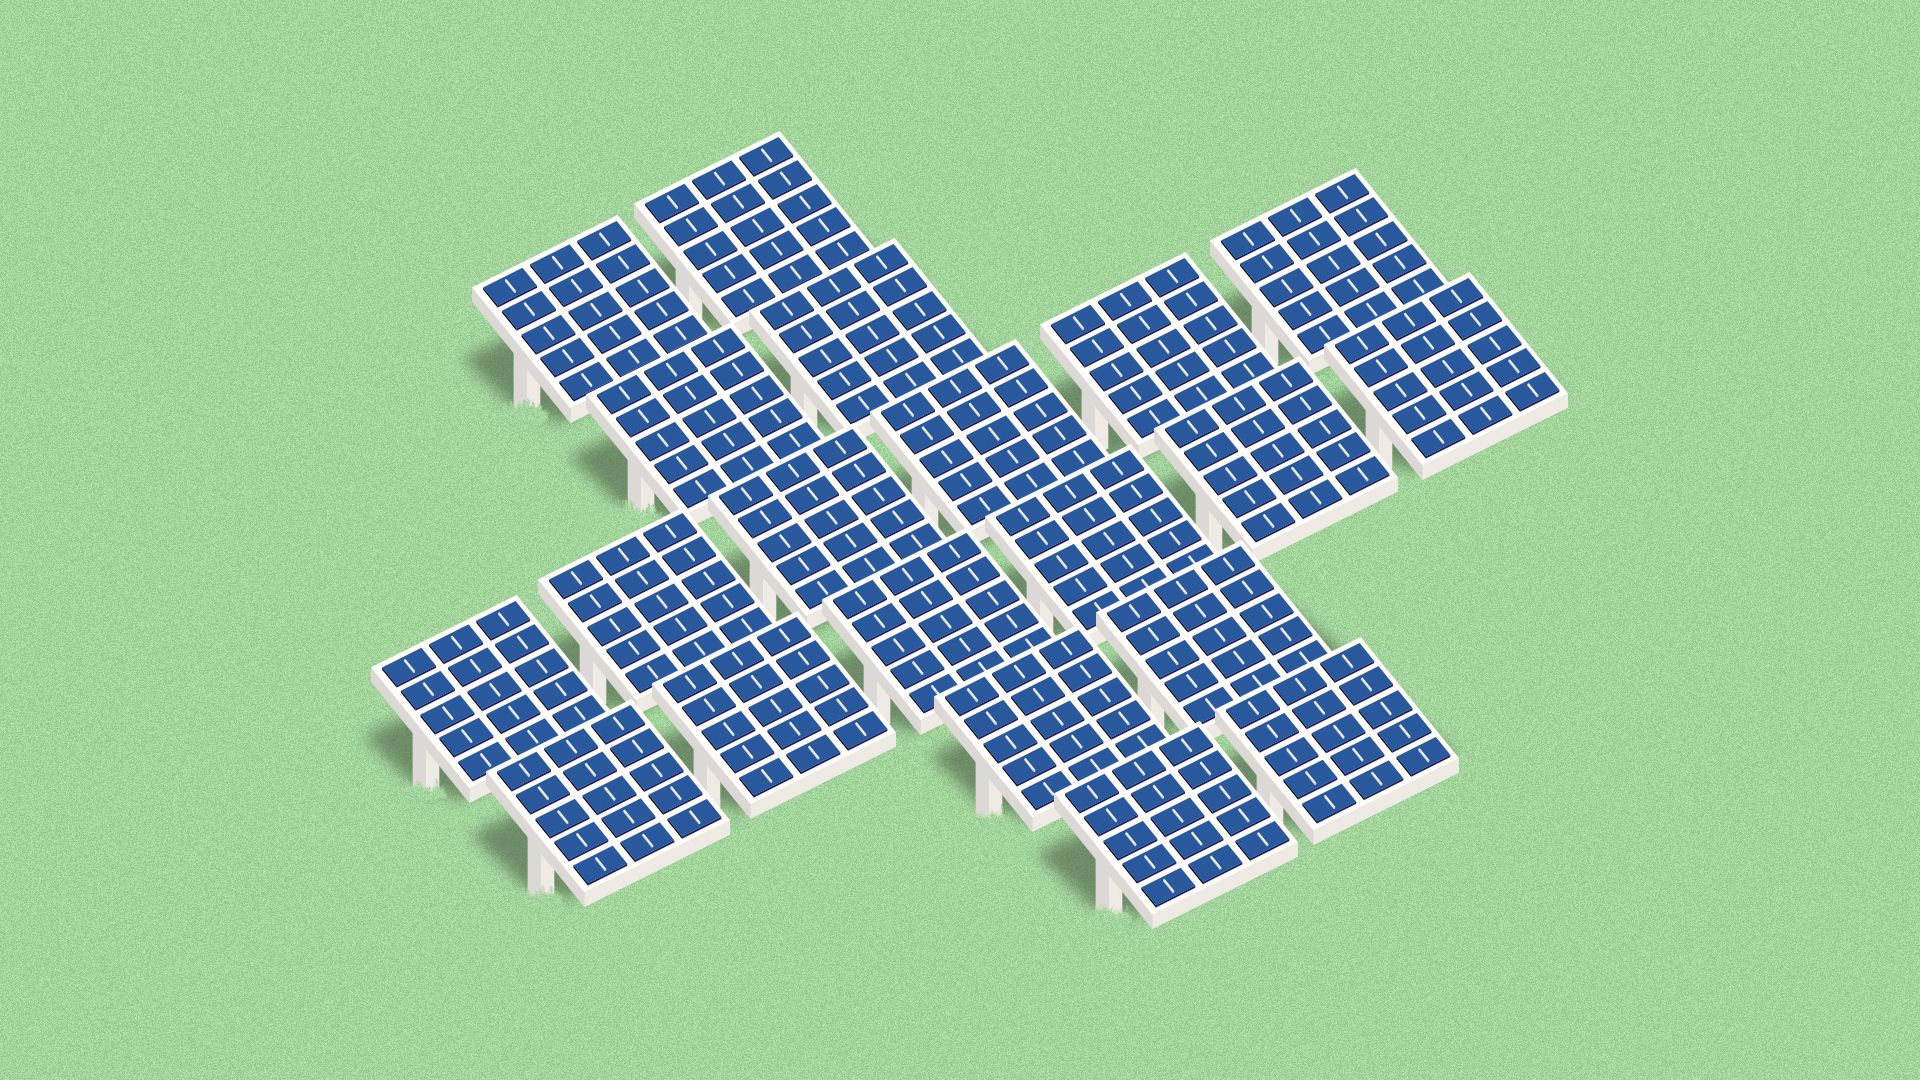 Illustration of a field of solar panels in the shape of a health cross.